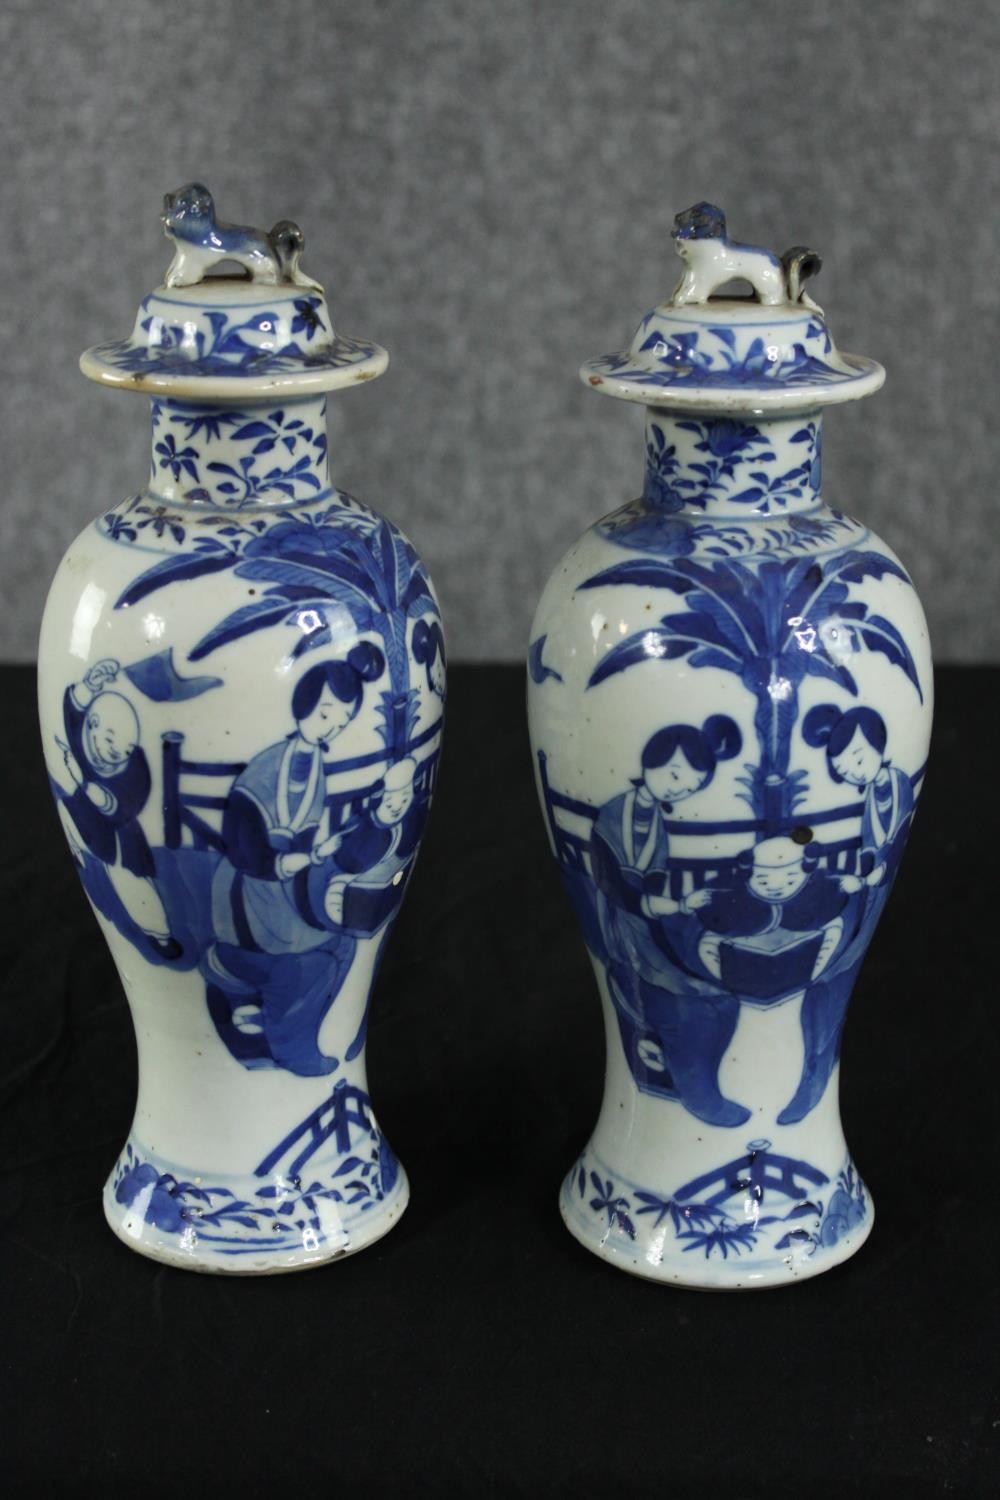 A pair of 19th century Chinese hand painted porcelain lidded urns. The lid finials in the form of